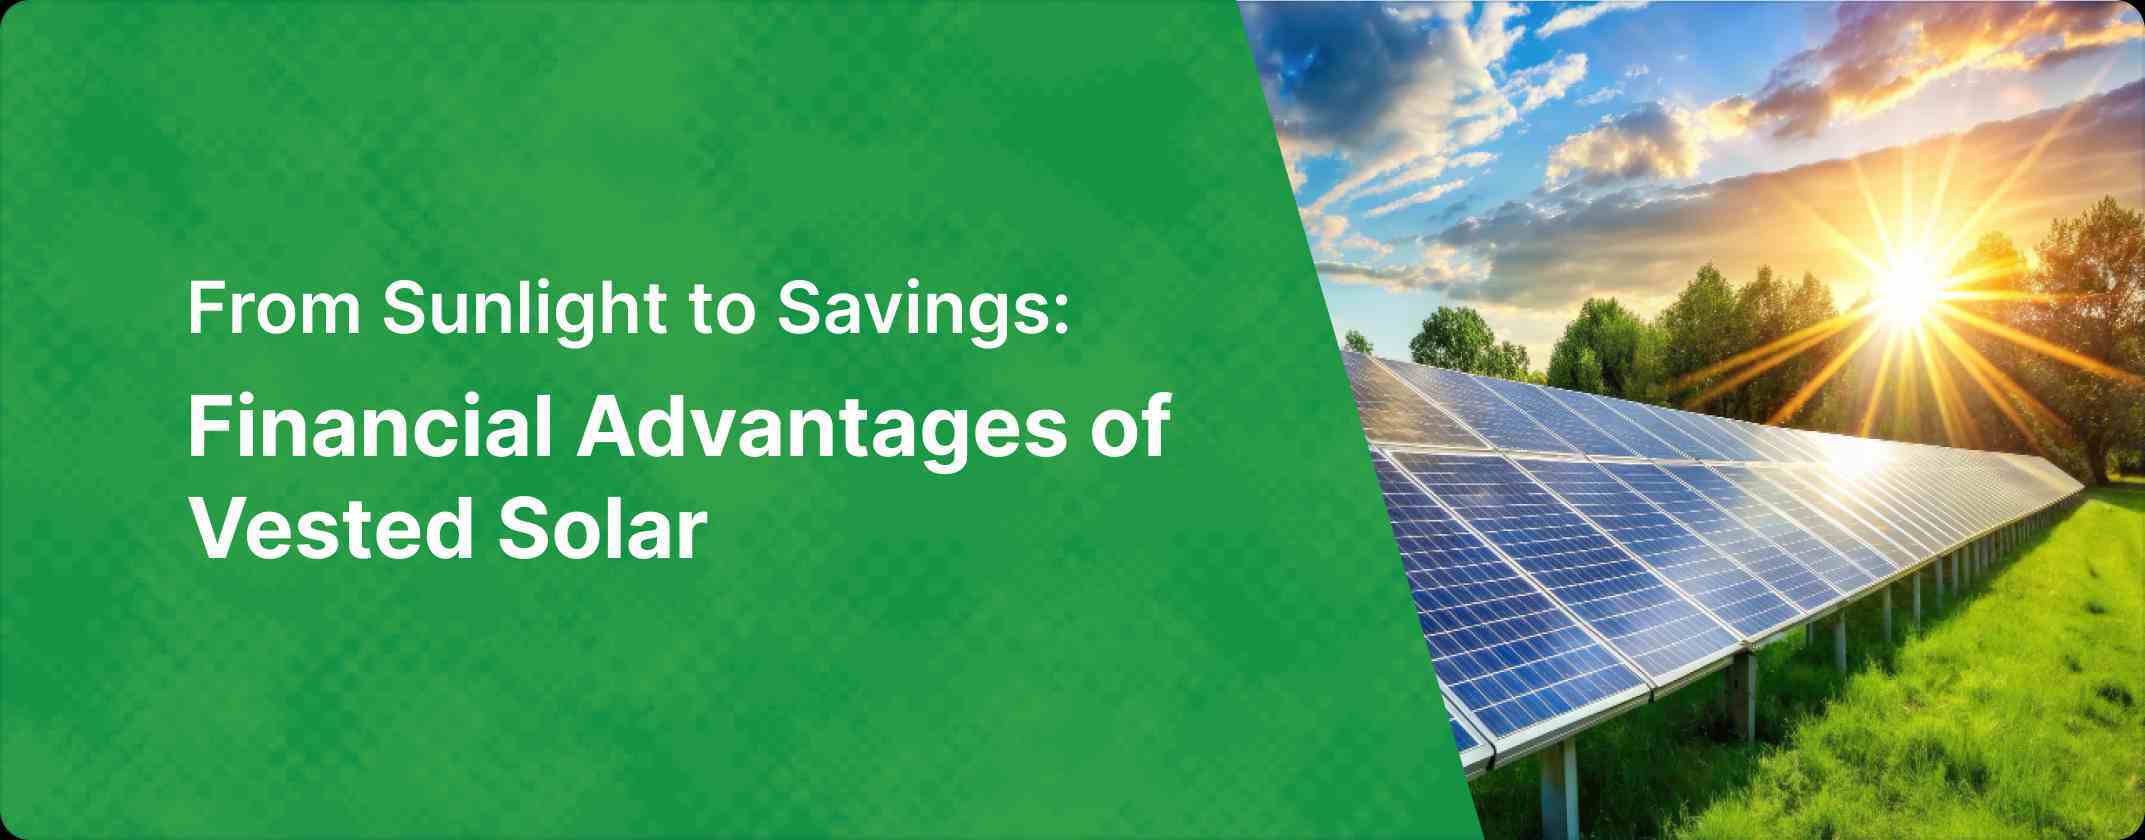 Financial benefits of owning a solar panel via Vested Solar